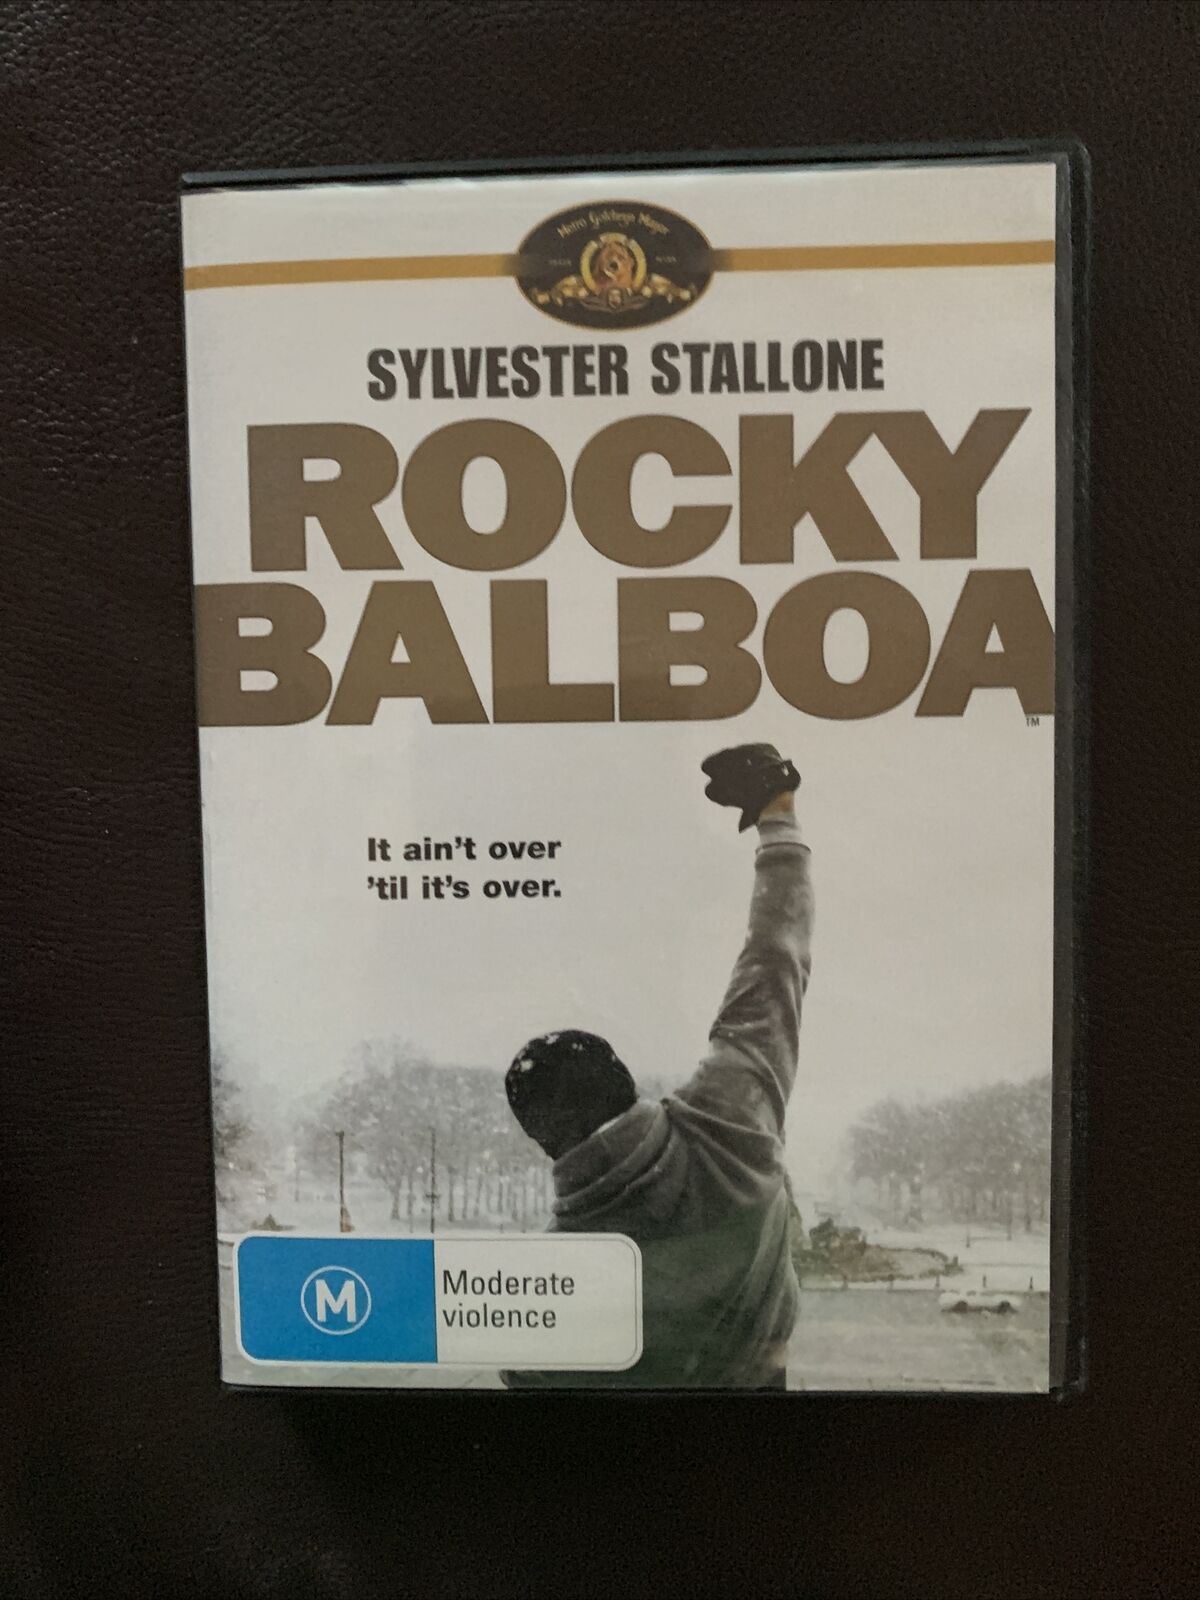 Sylvester Stallone: Rocky - The Heavyweight Collection (DVD, 2007) Region 4